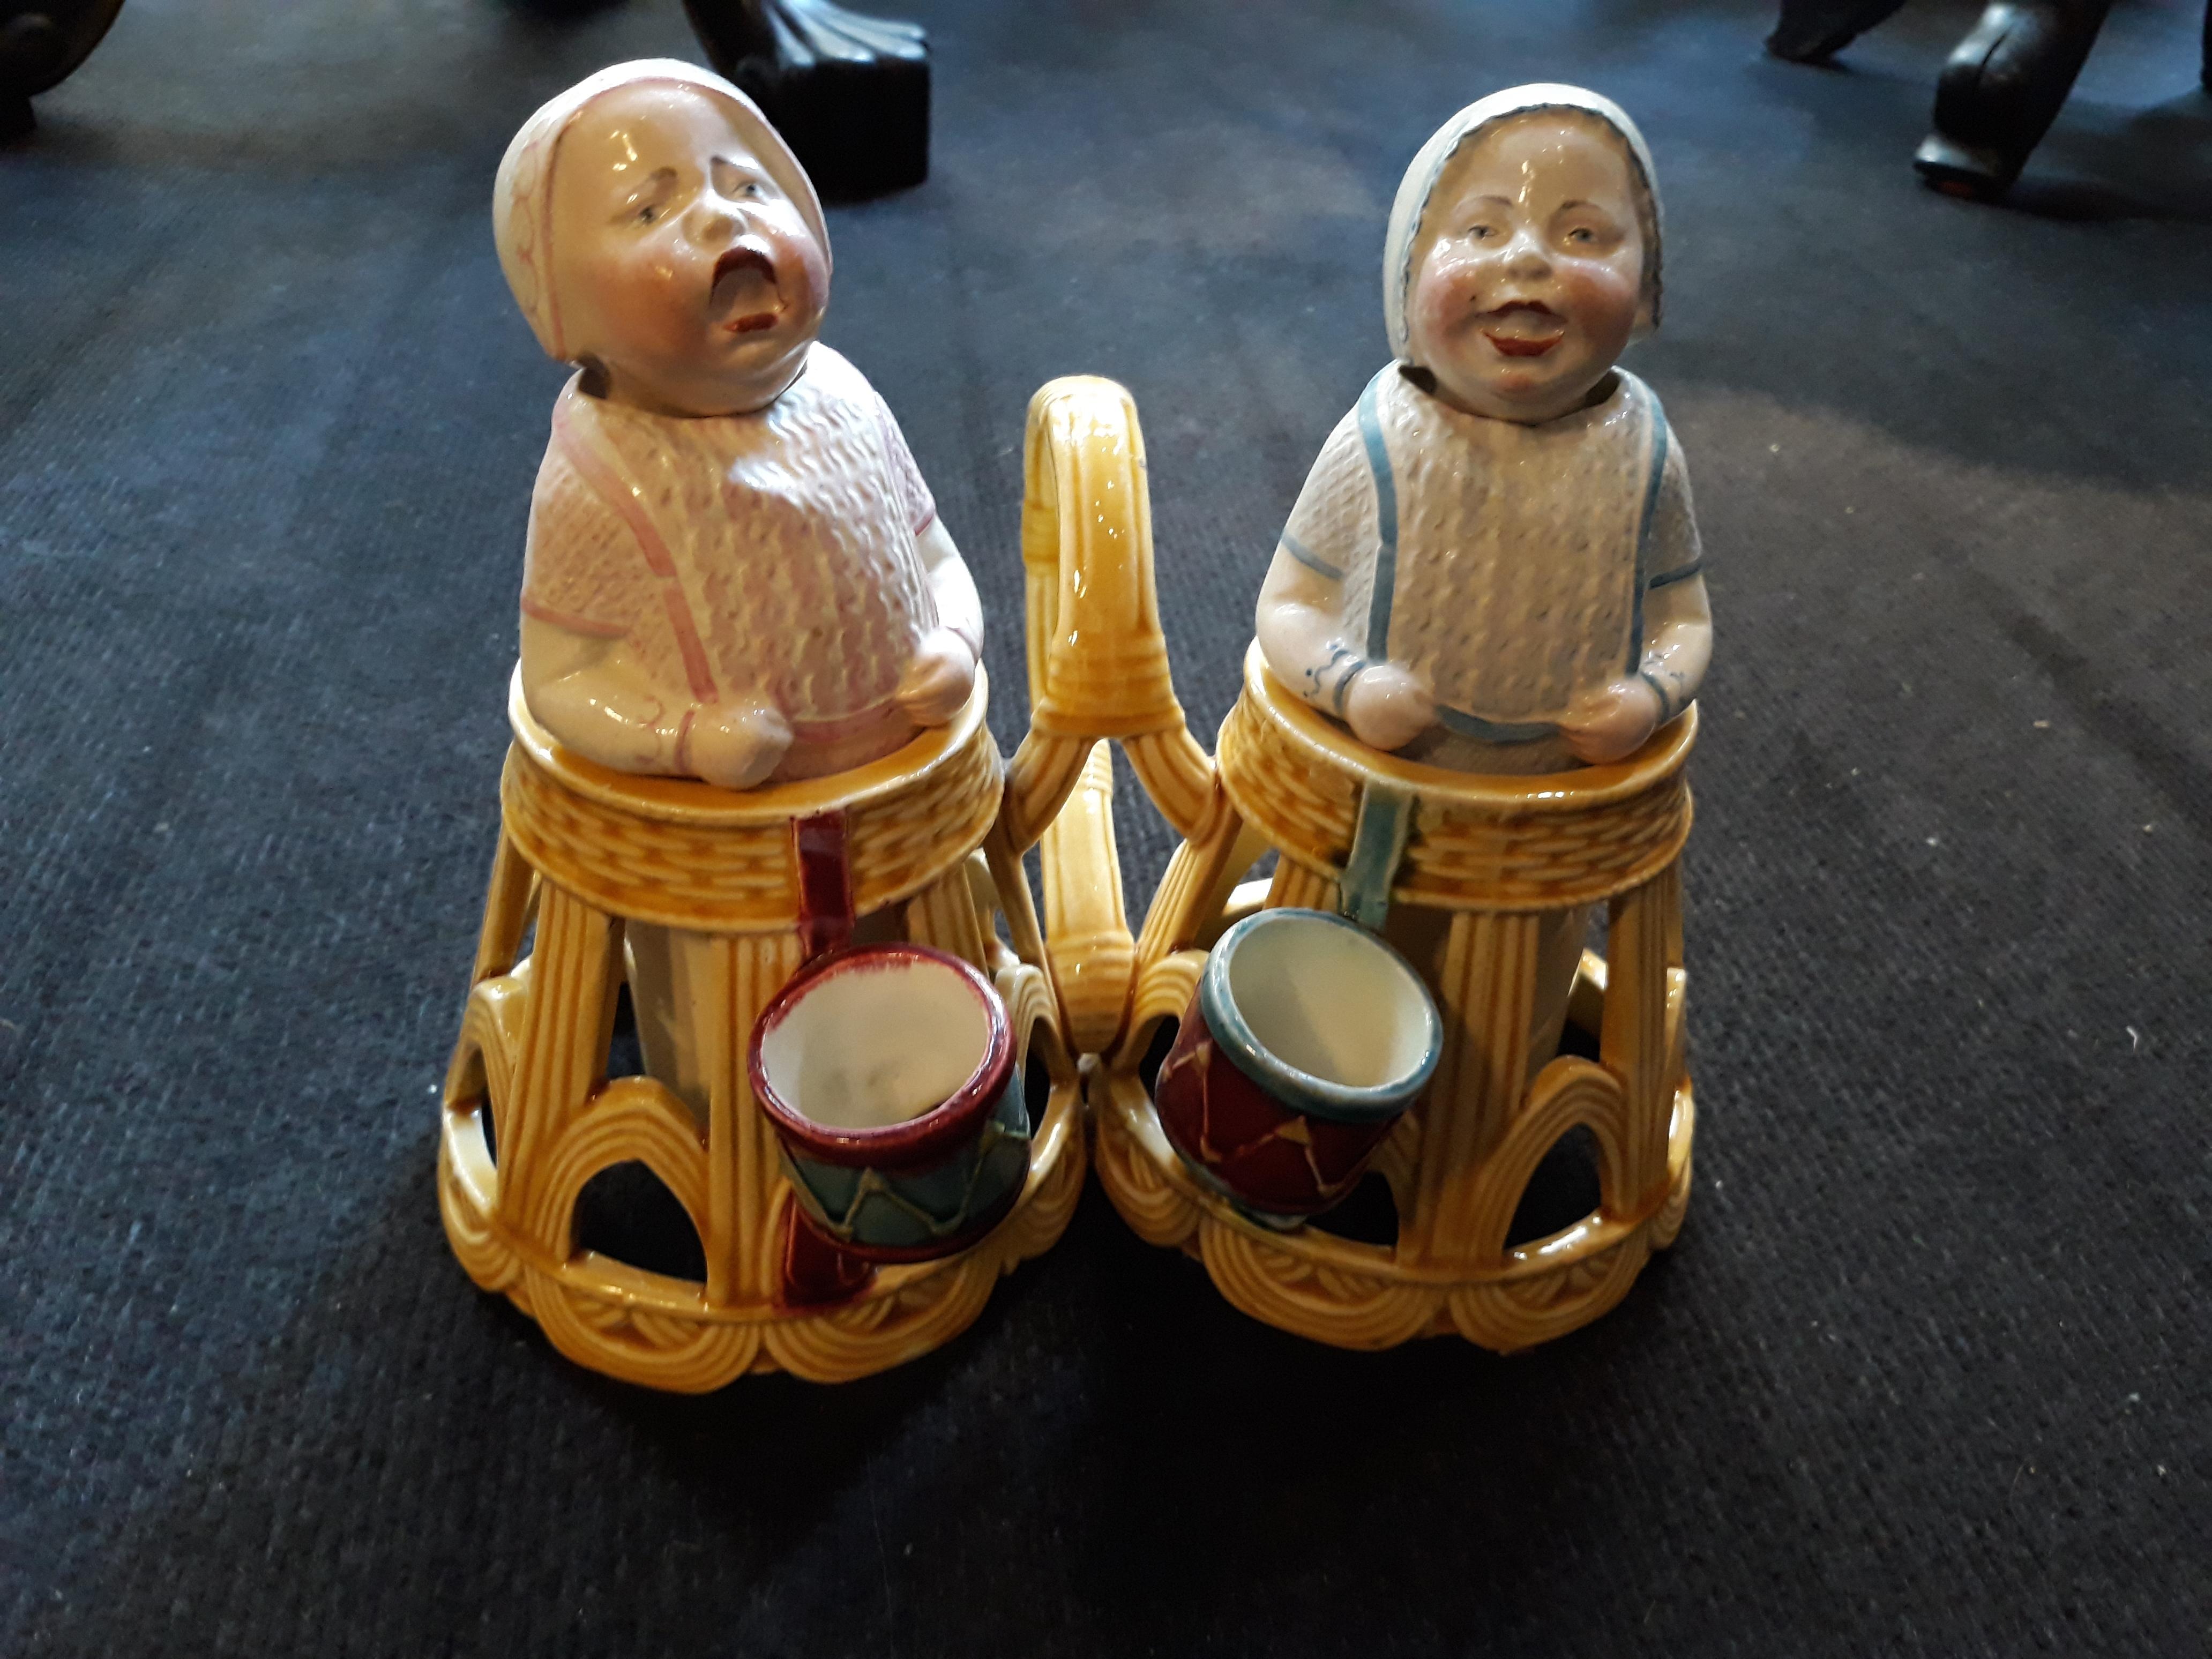 20th Century 19th Century Oil and Vinegar Shakers by George Dreyfus For Sale